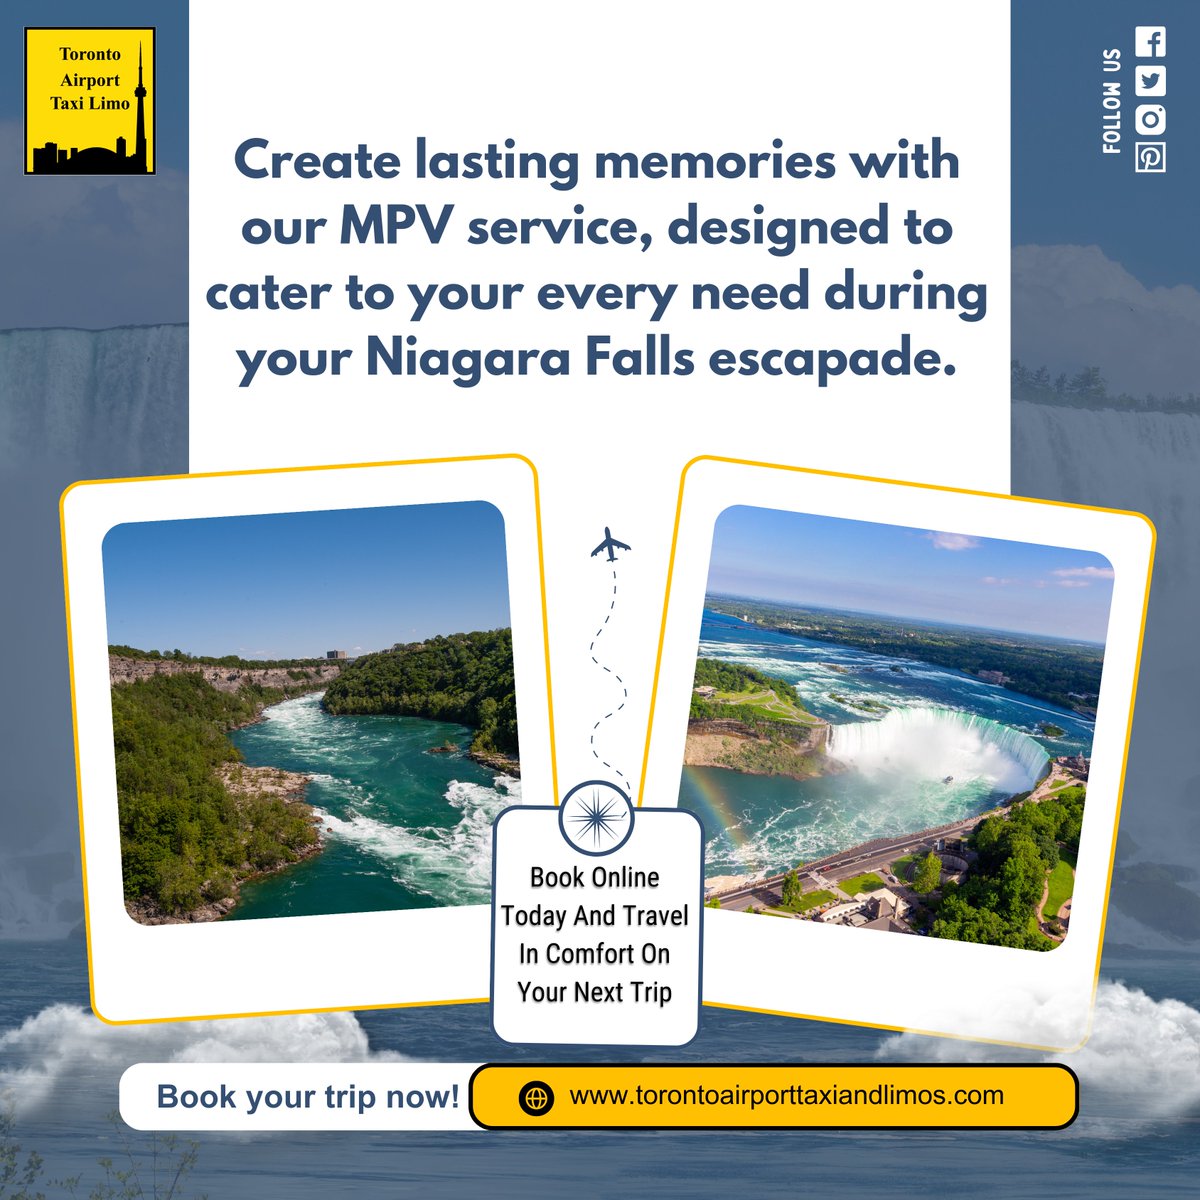 🌊✨ Create lasting memories with our MPV service, designed to cater to your every need during your Niagara Falls escapade. 🚘🌄

Book Online Today And Travel In Comfort On Your Next Trip! 📅👌

#NiagaraFallsAdventure #ExploreCanada #MPVExperience #TravelWithComfort #BookNow